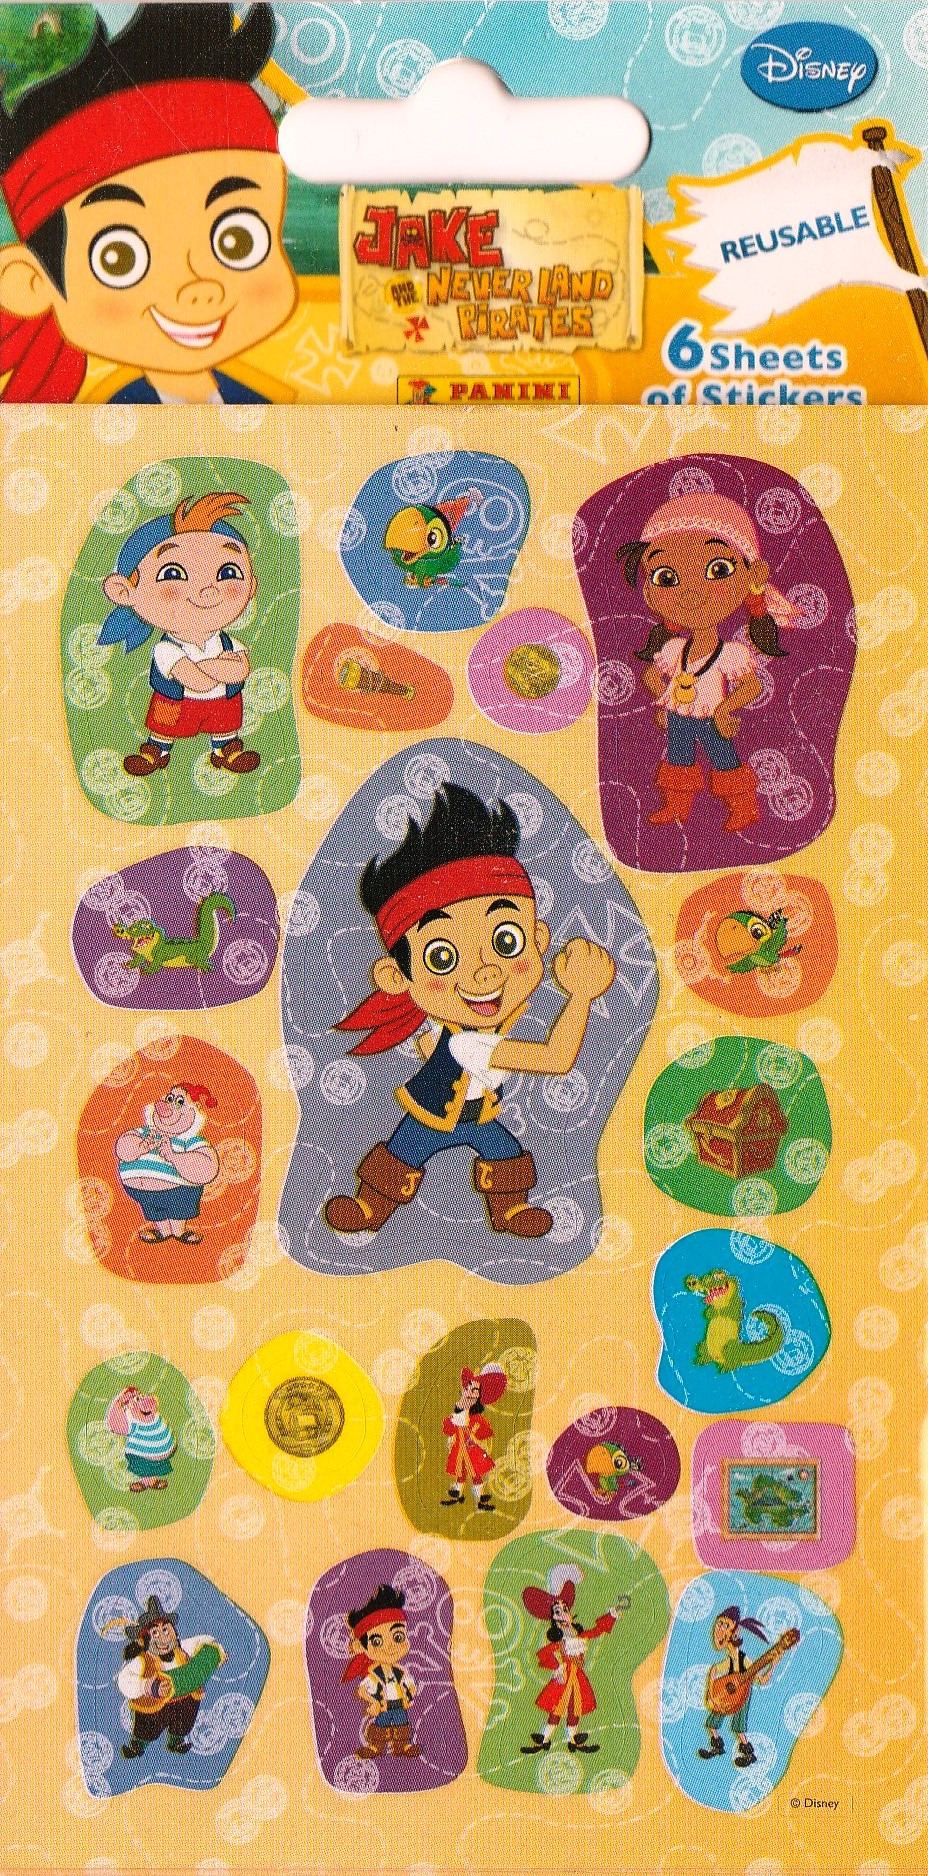 Jake And The Never Land Pirates - Mini Stickers - 6 Sheets - NEW